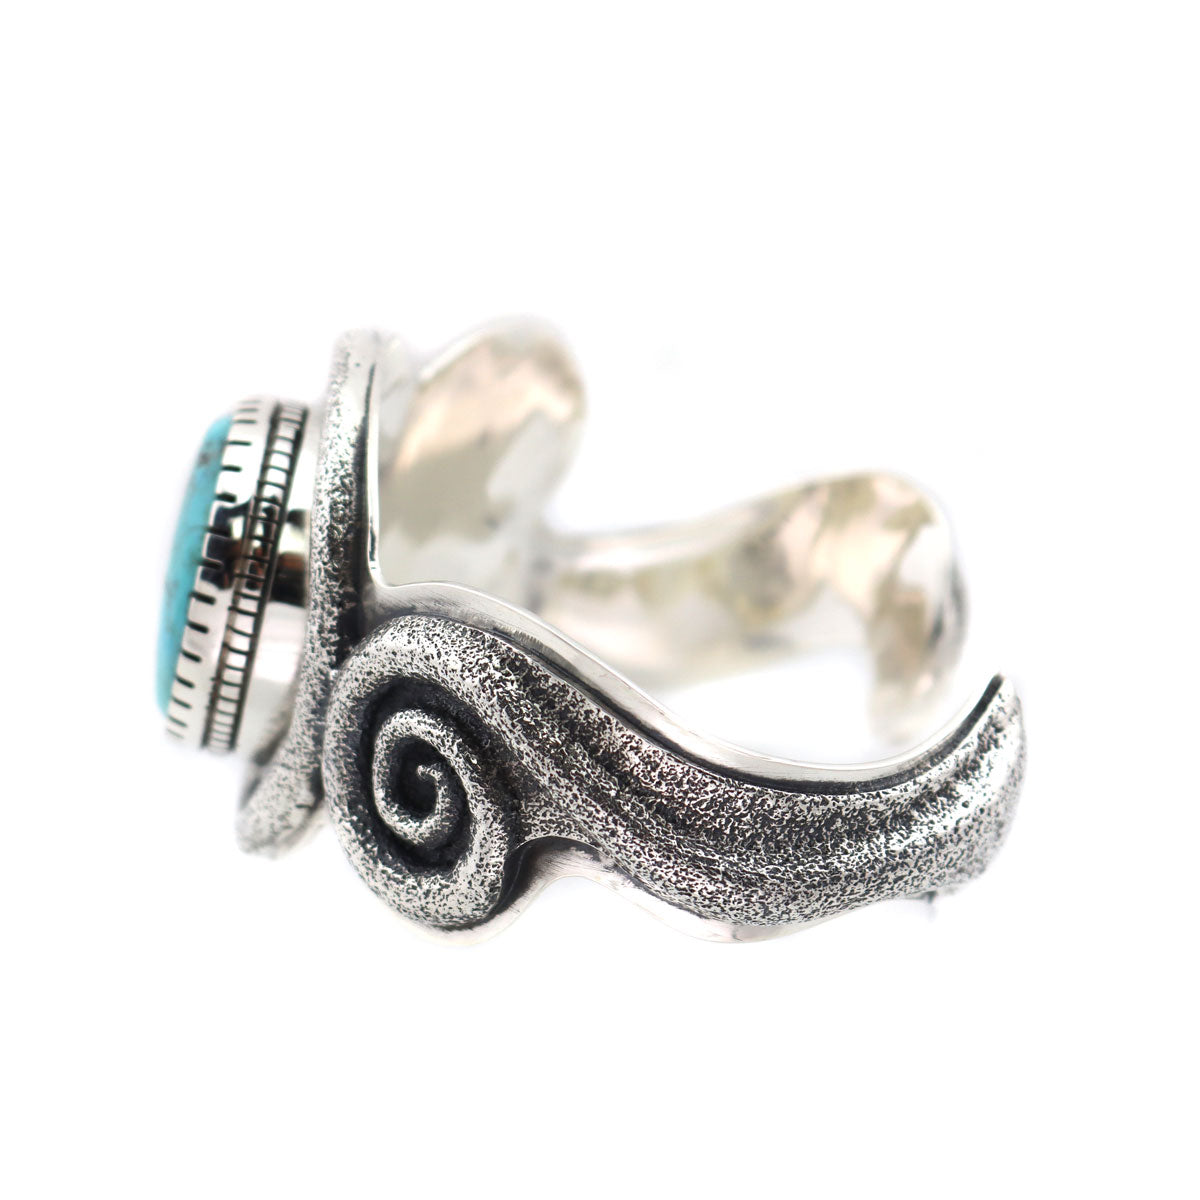 Roy Talahaftewa - Hopi Contemporary Turquoise and Silver Sandcast Bracelet with Spiral Design, size 7 (J14263)1